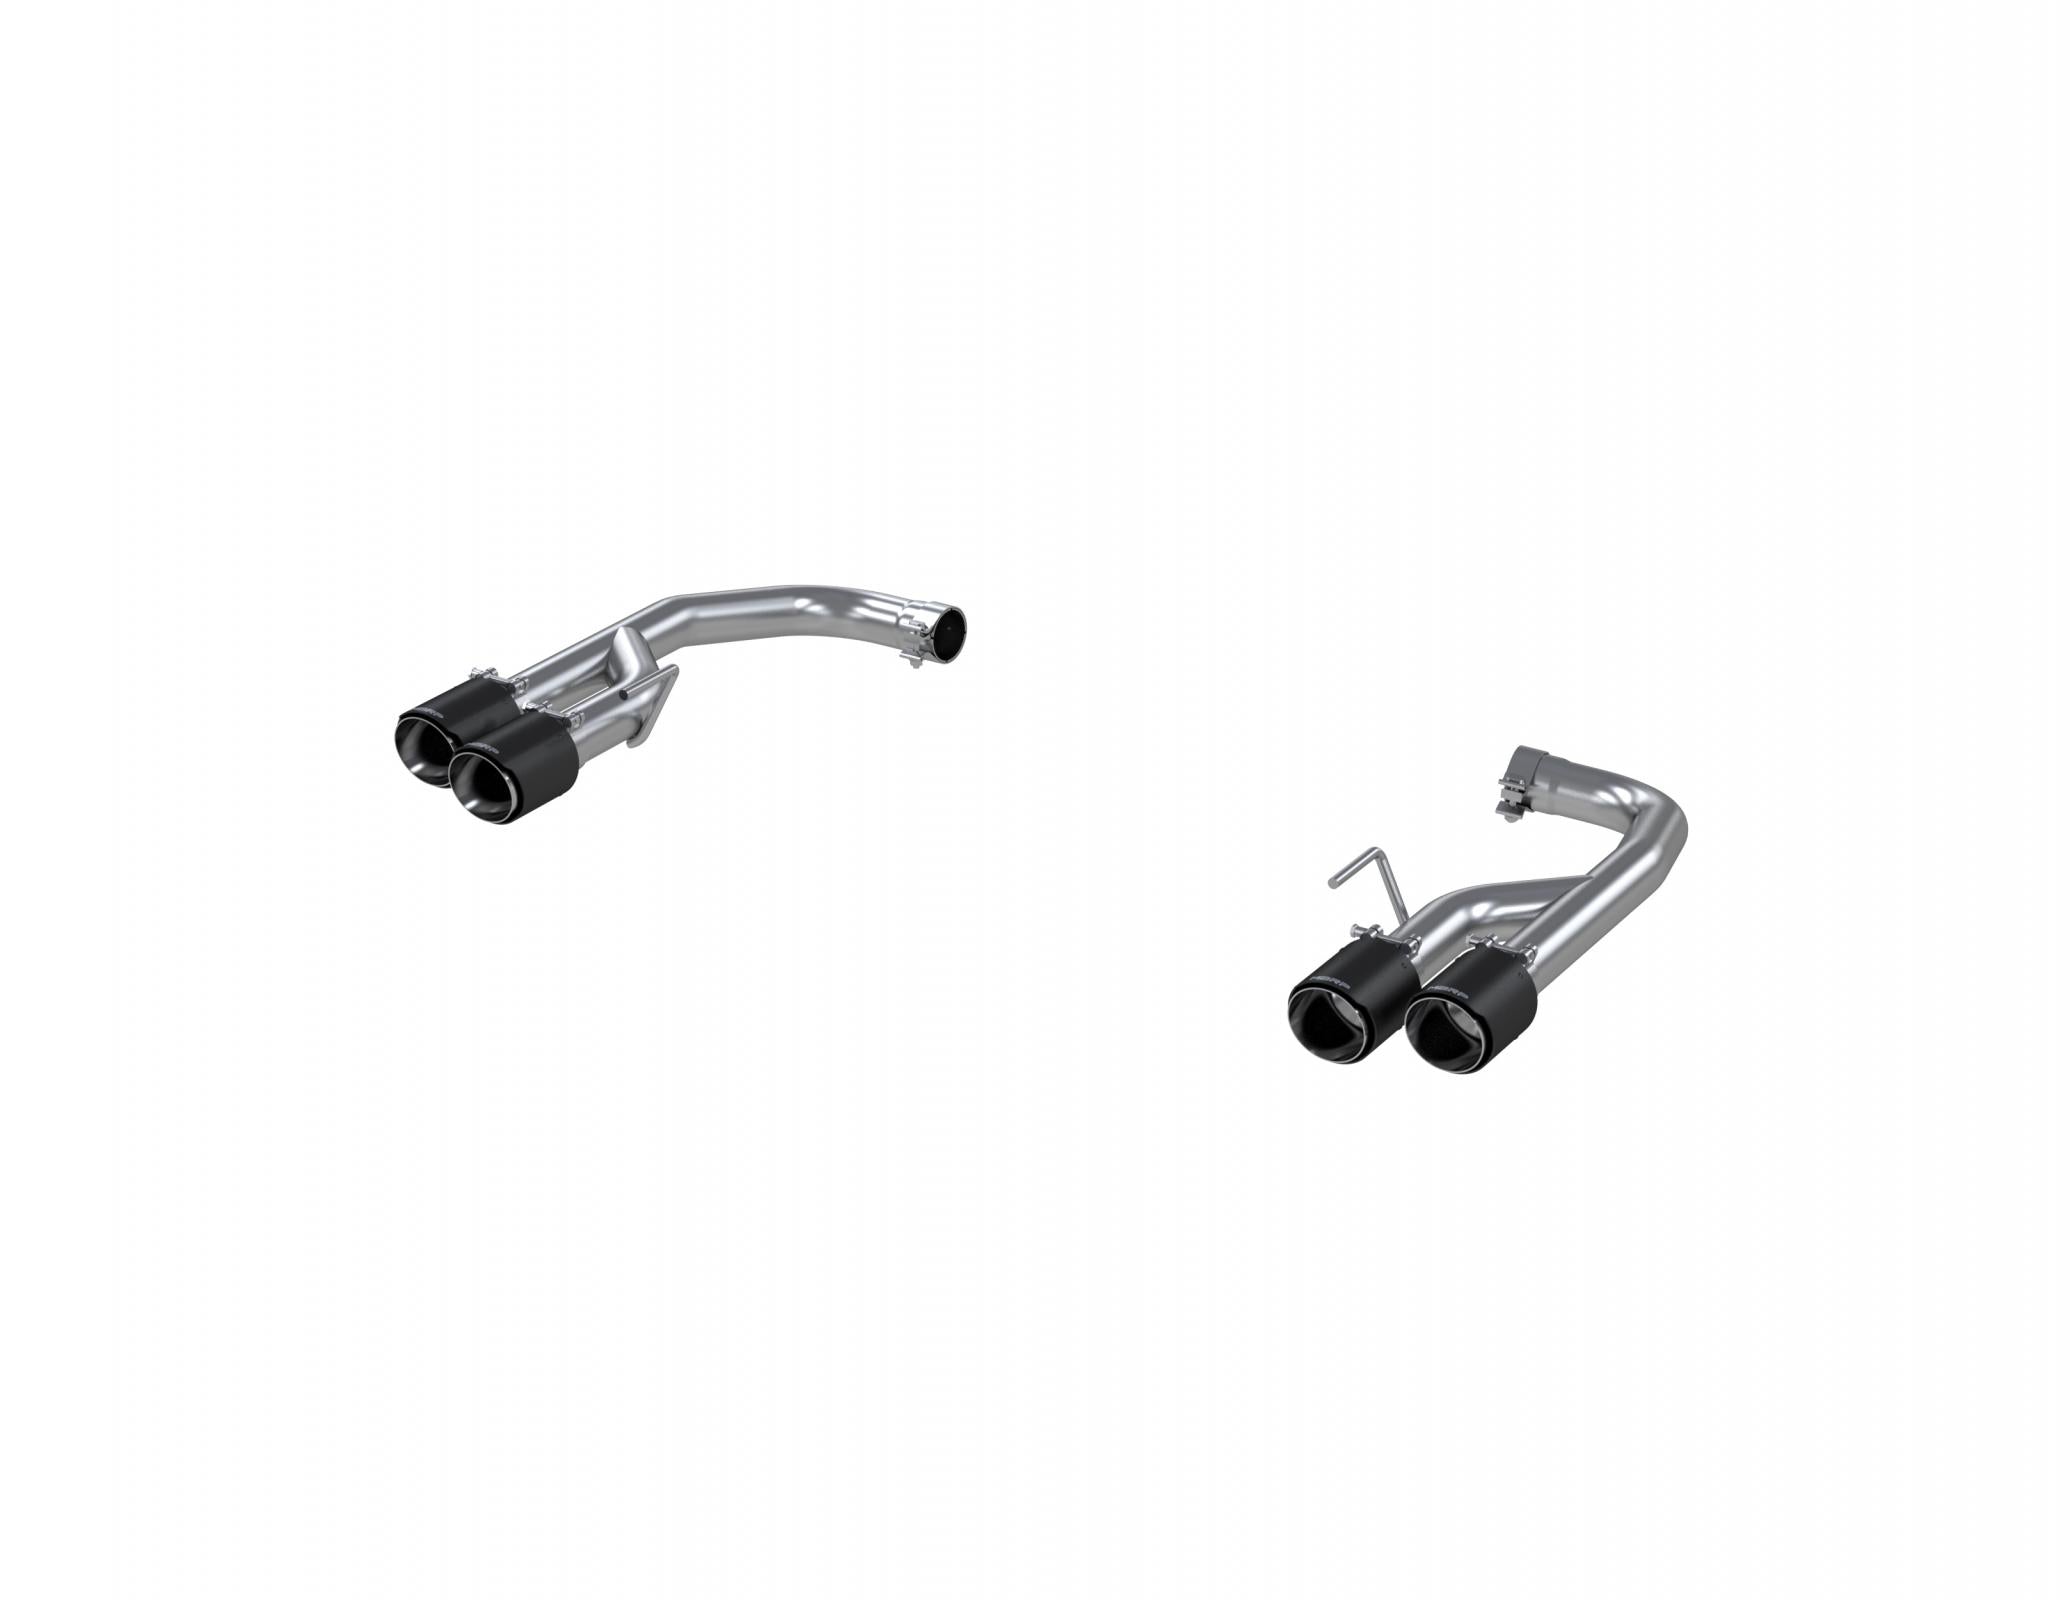 MBRP Exhaust 2018-Up Ford Mustang GT 5.0L T304 Stainless Steel 2.5 Inch Axle-Back with Quad Carbon Fiber Tips MBRP S72113CF